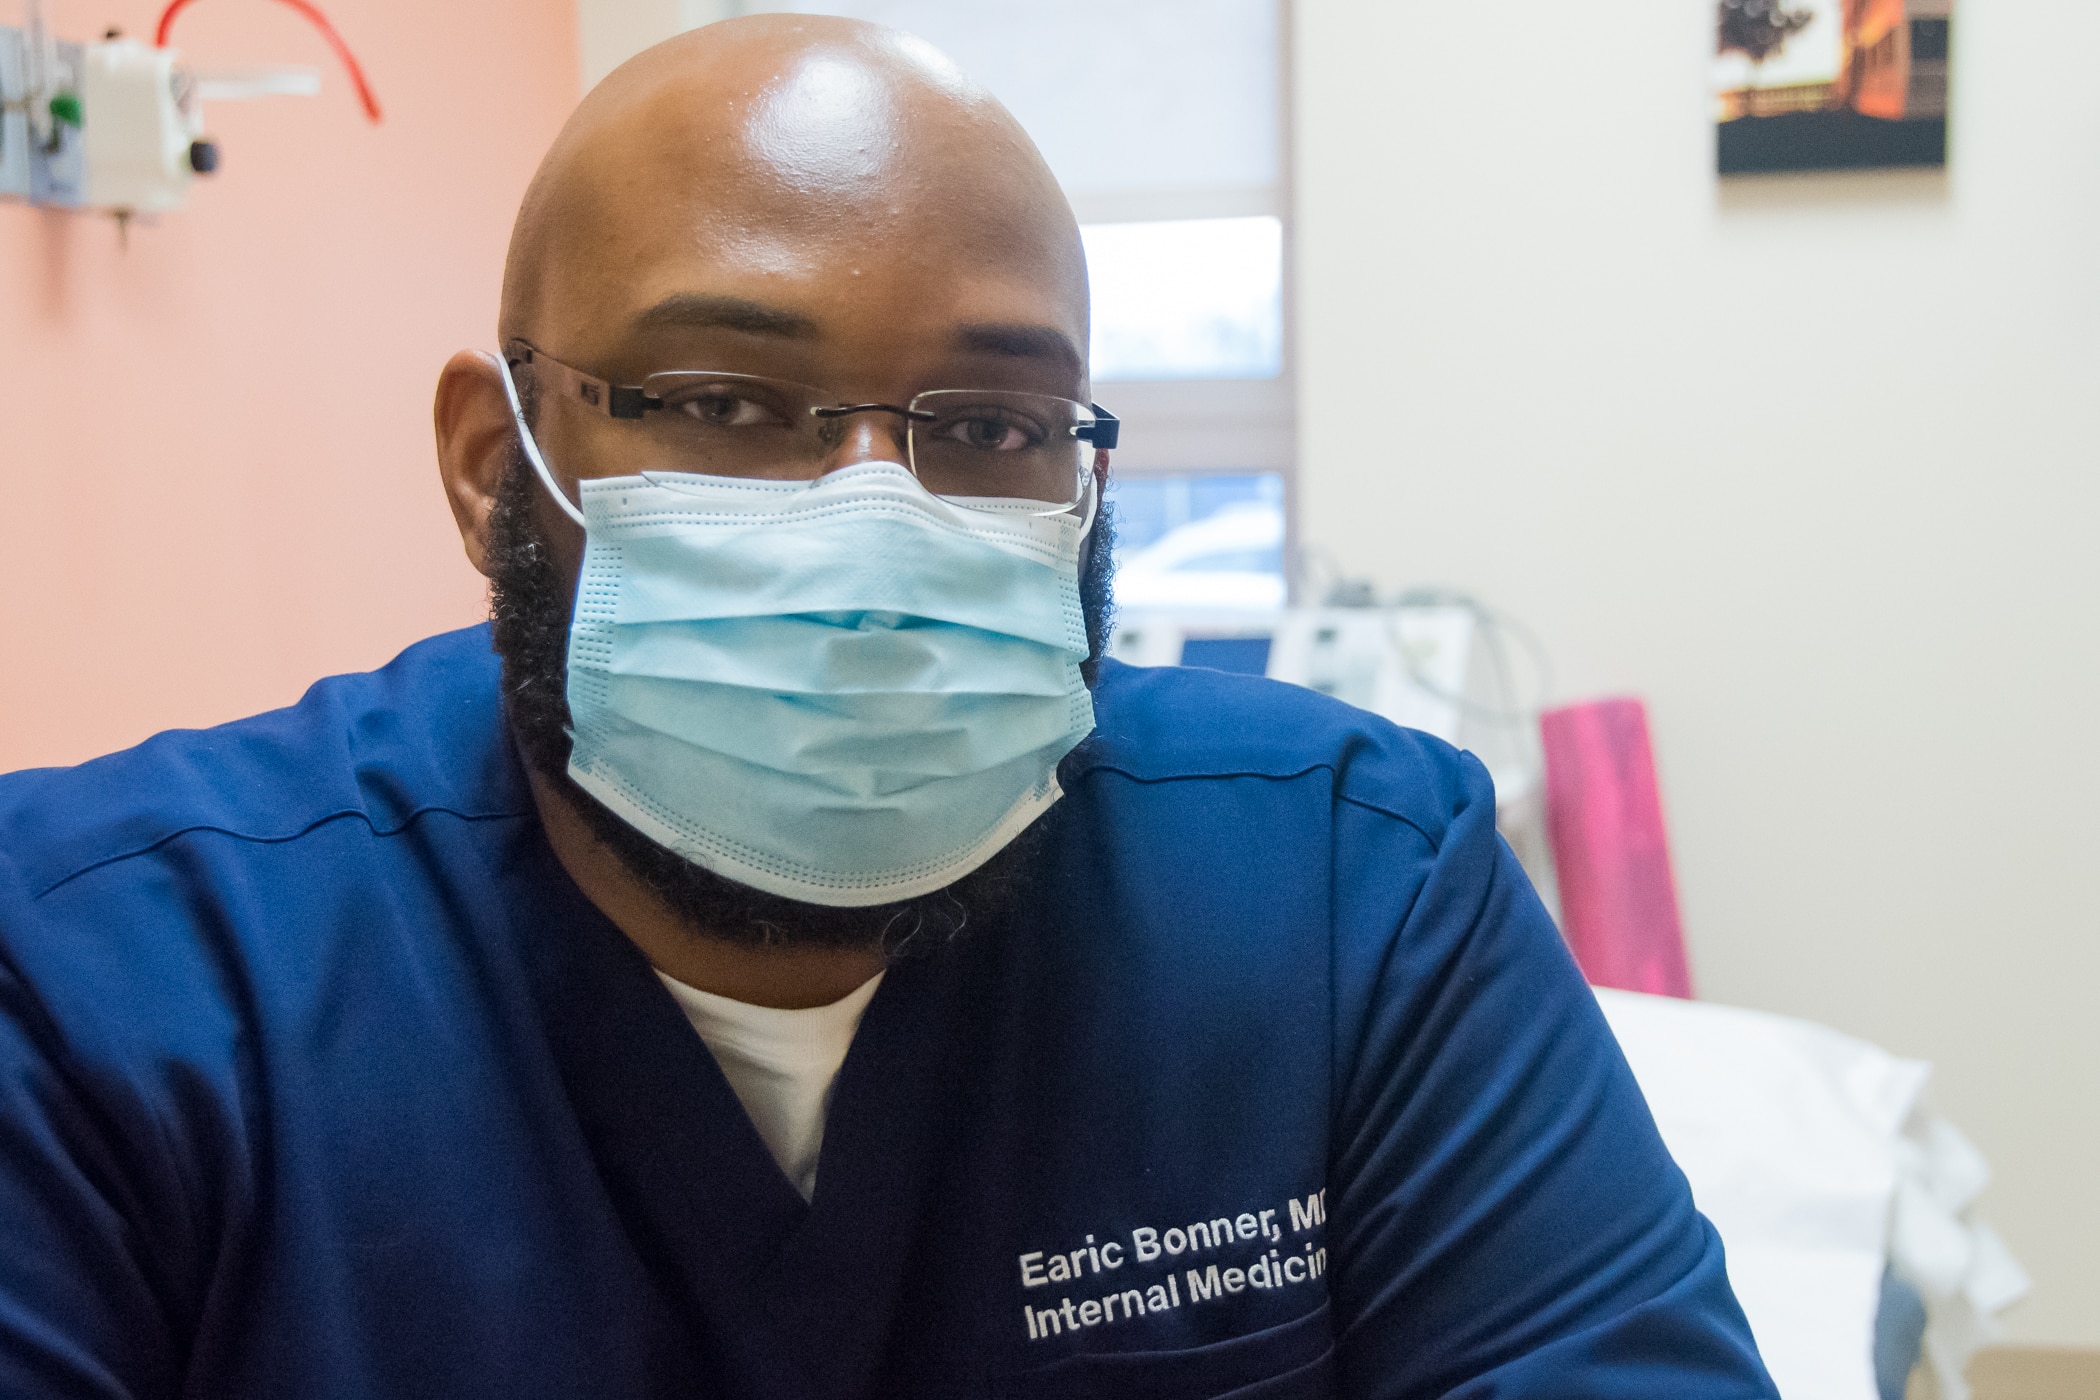 Dr. Earic Bonner poses for a photo